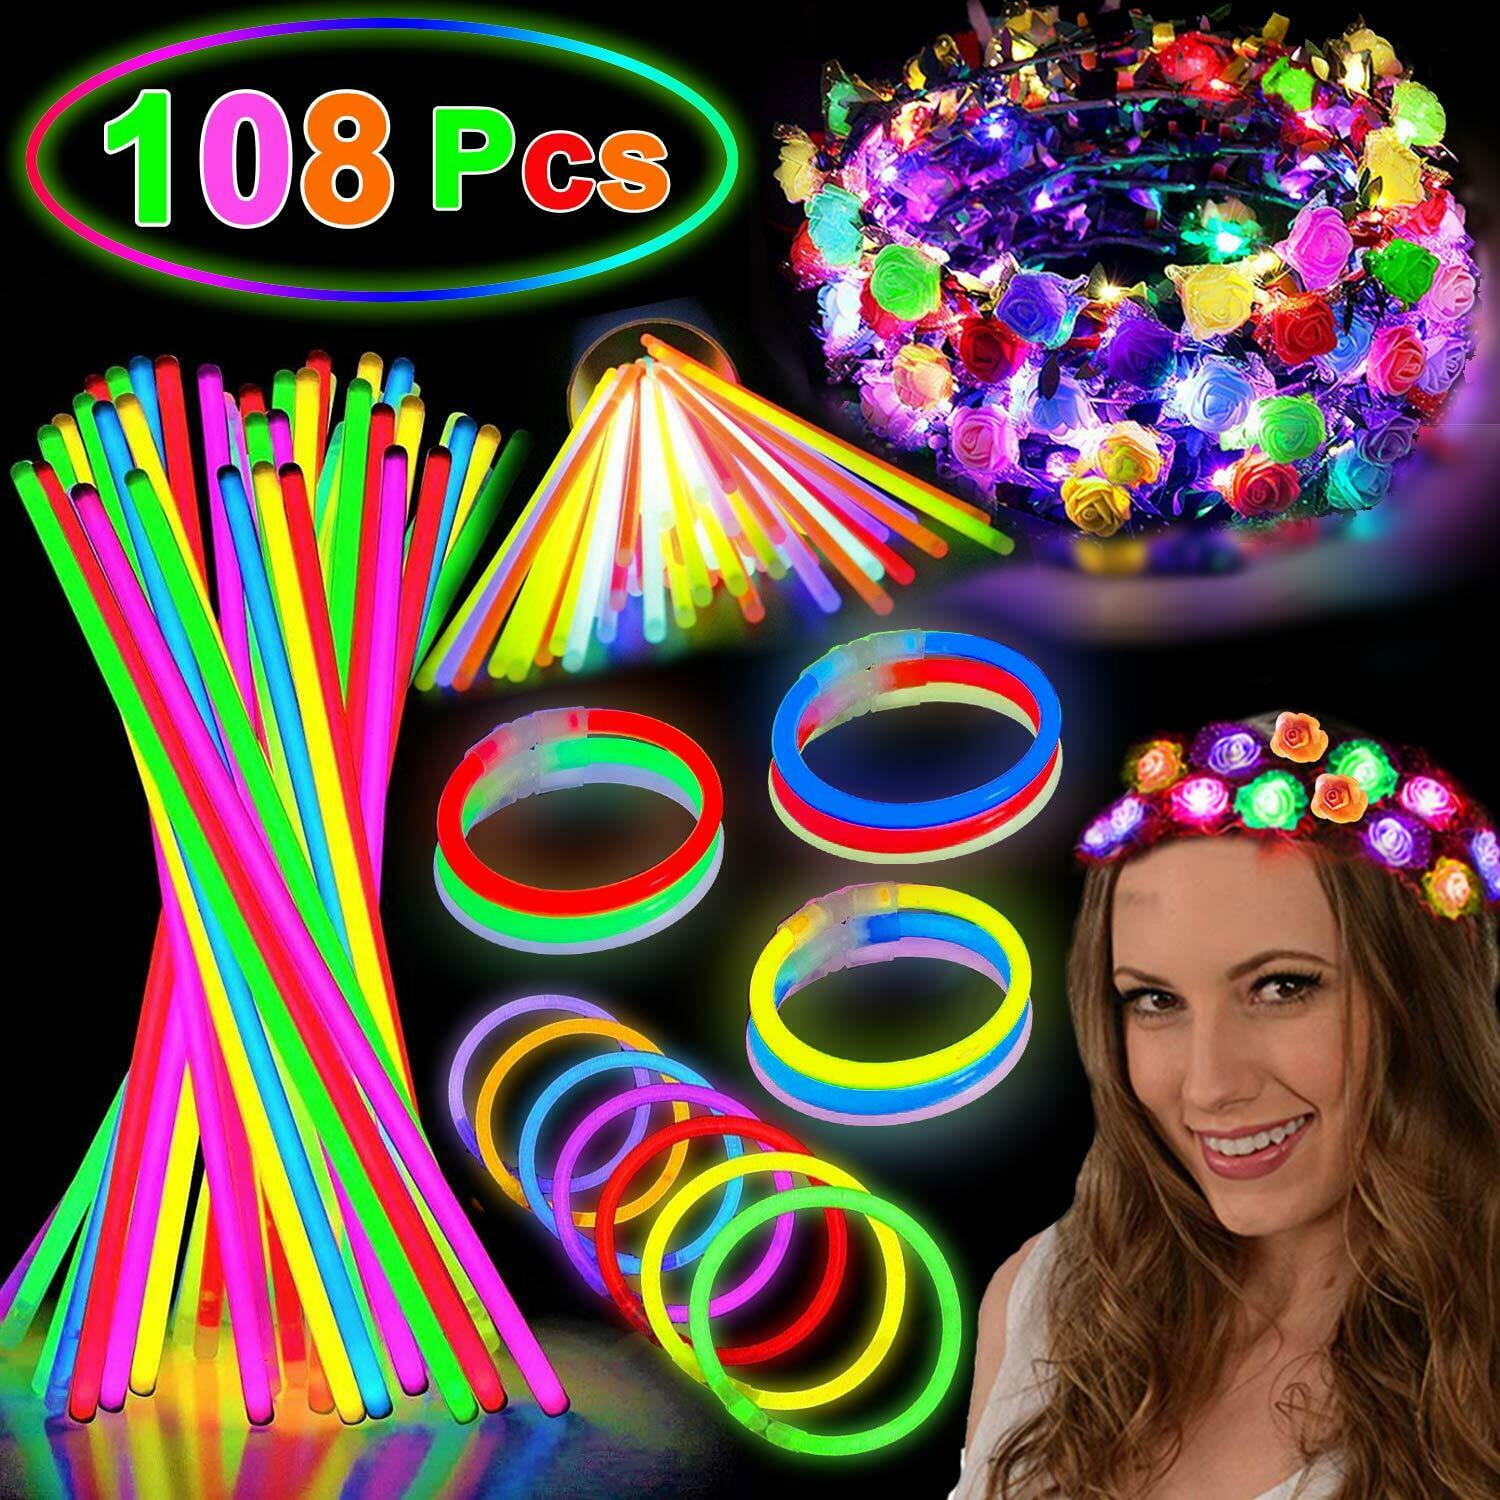 for Kids Party Supplies Birthday Party Favors Game Prizes or Treats Glow Fever 50ct 4 Glow Sticks Bulk Green